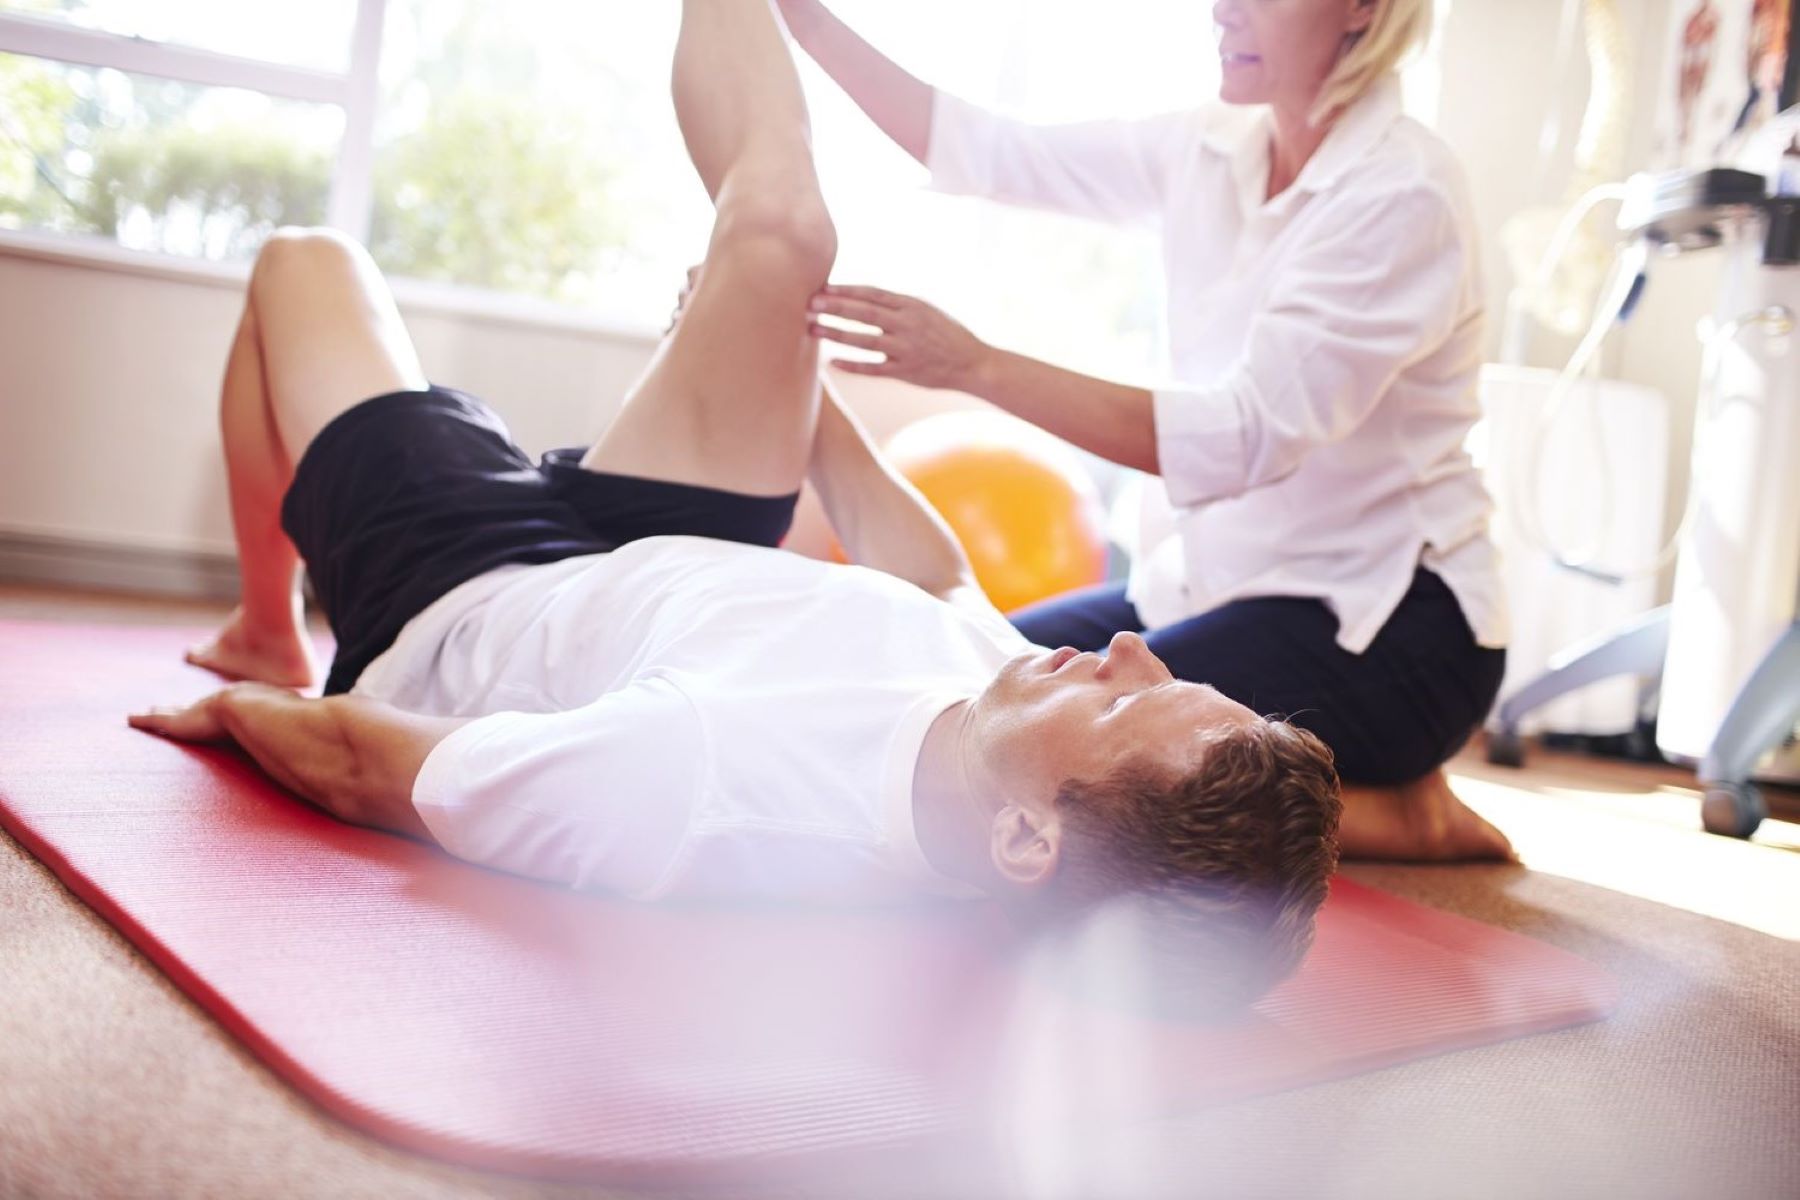 Top 5 Exercises Recommended By A Physio For Strengthening Tendons